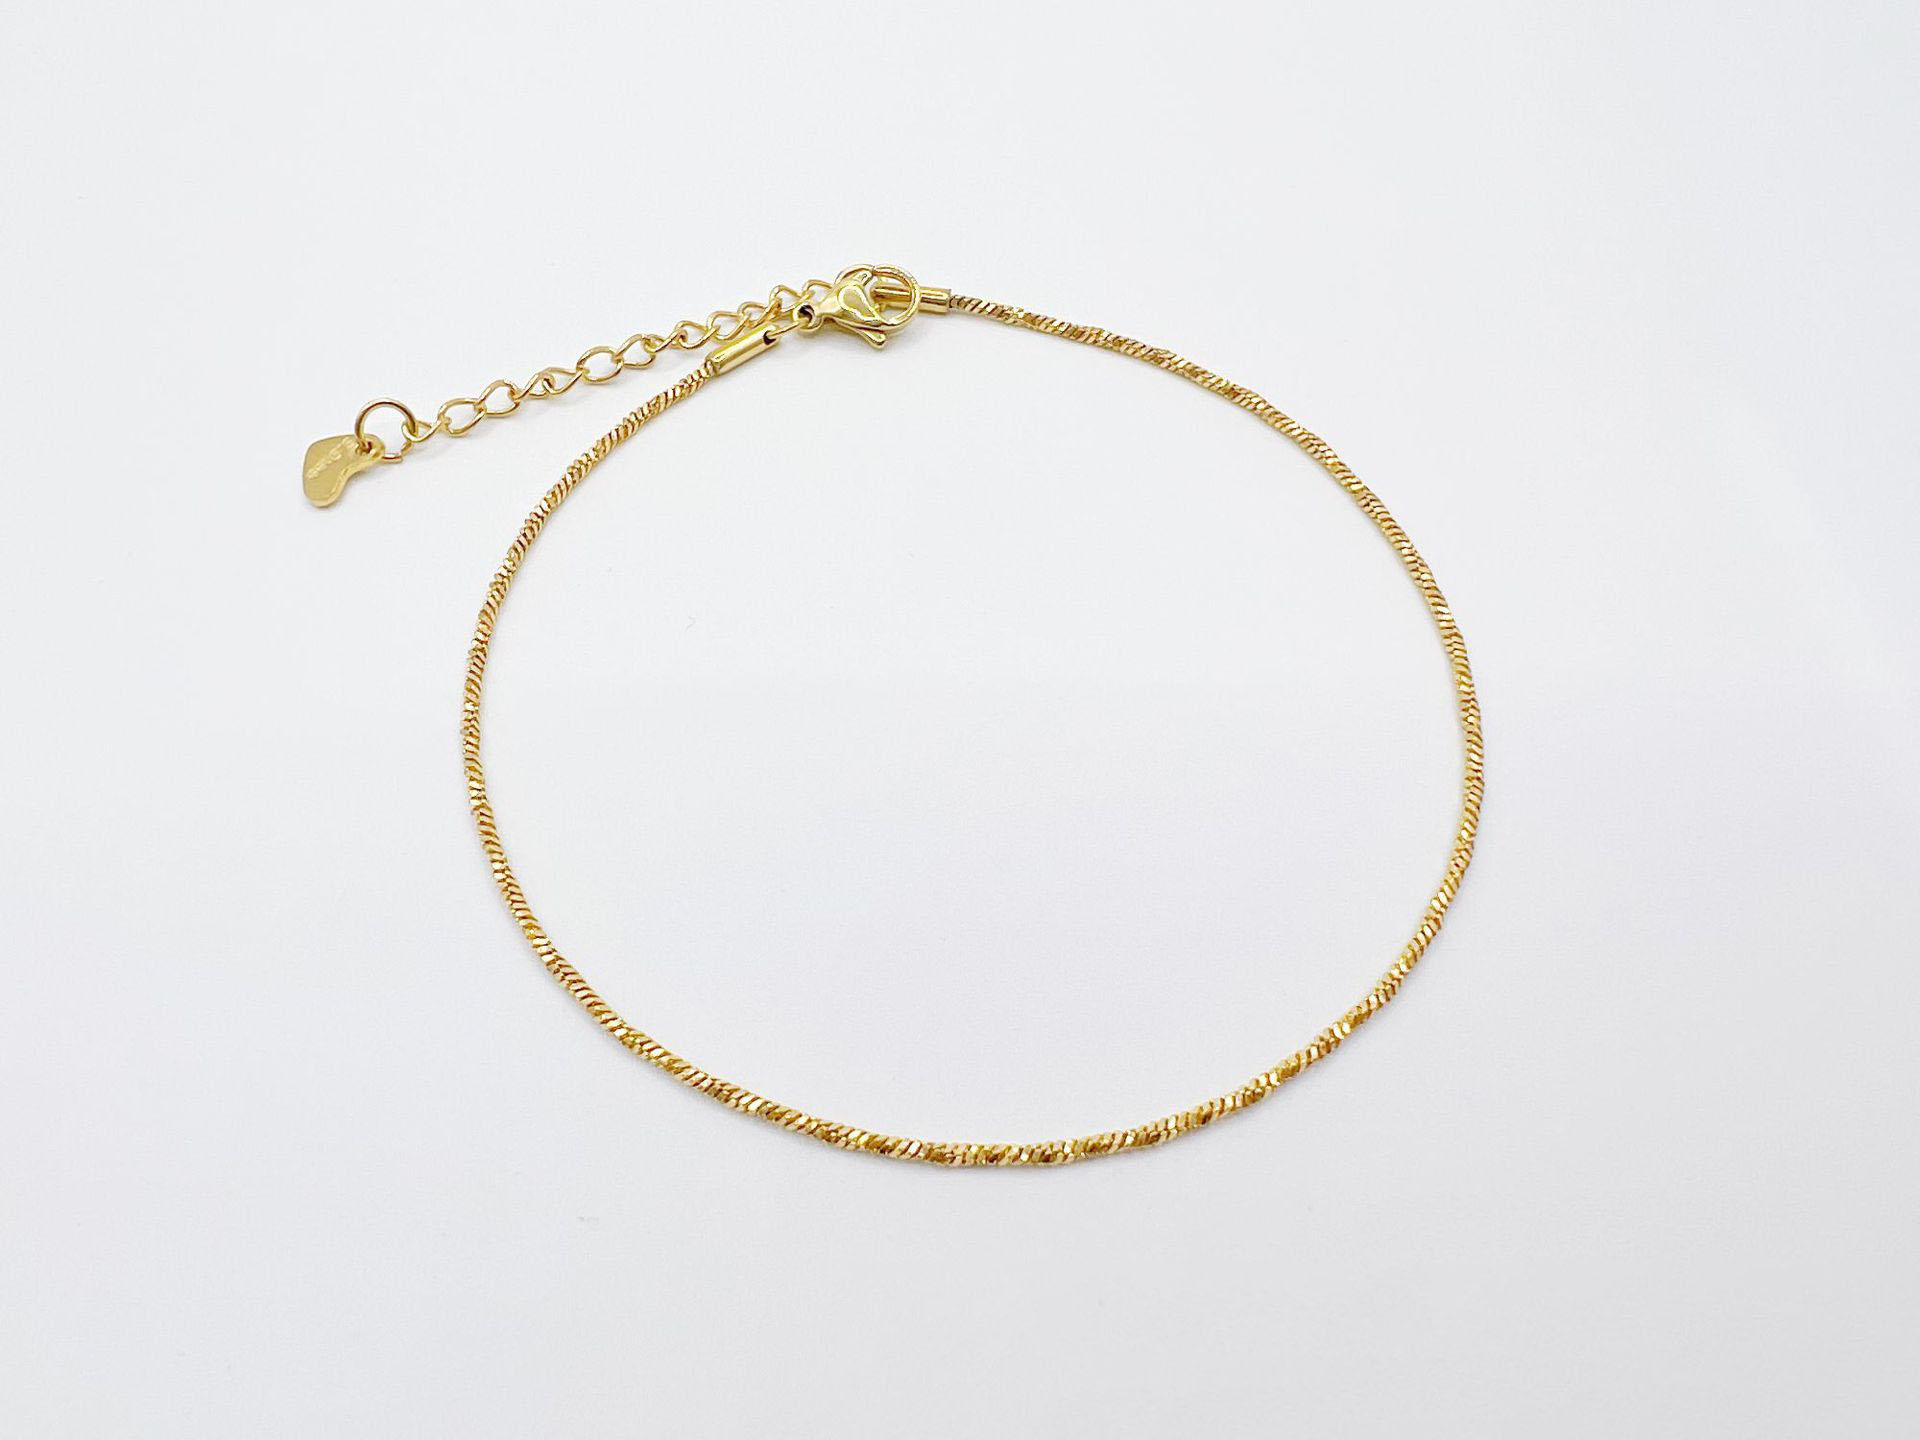 7:Twisted snake chain in gold